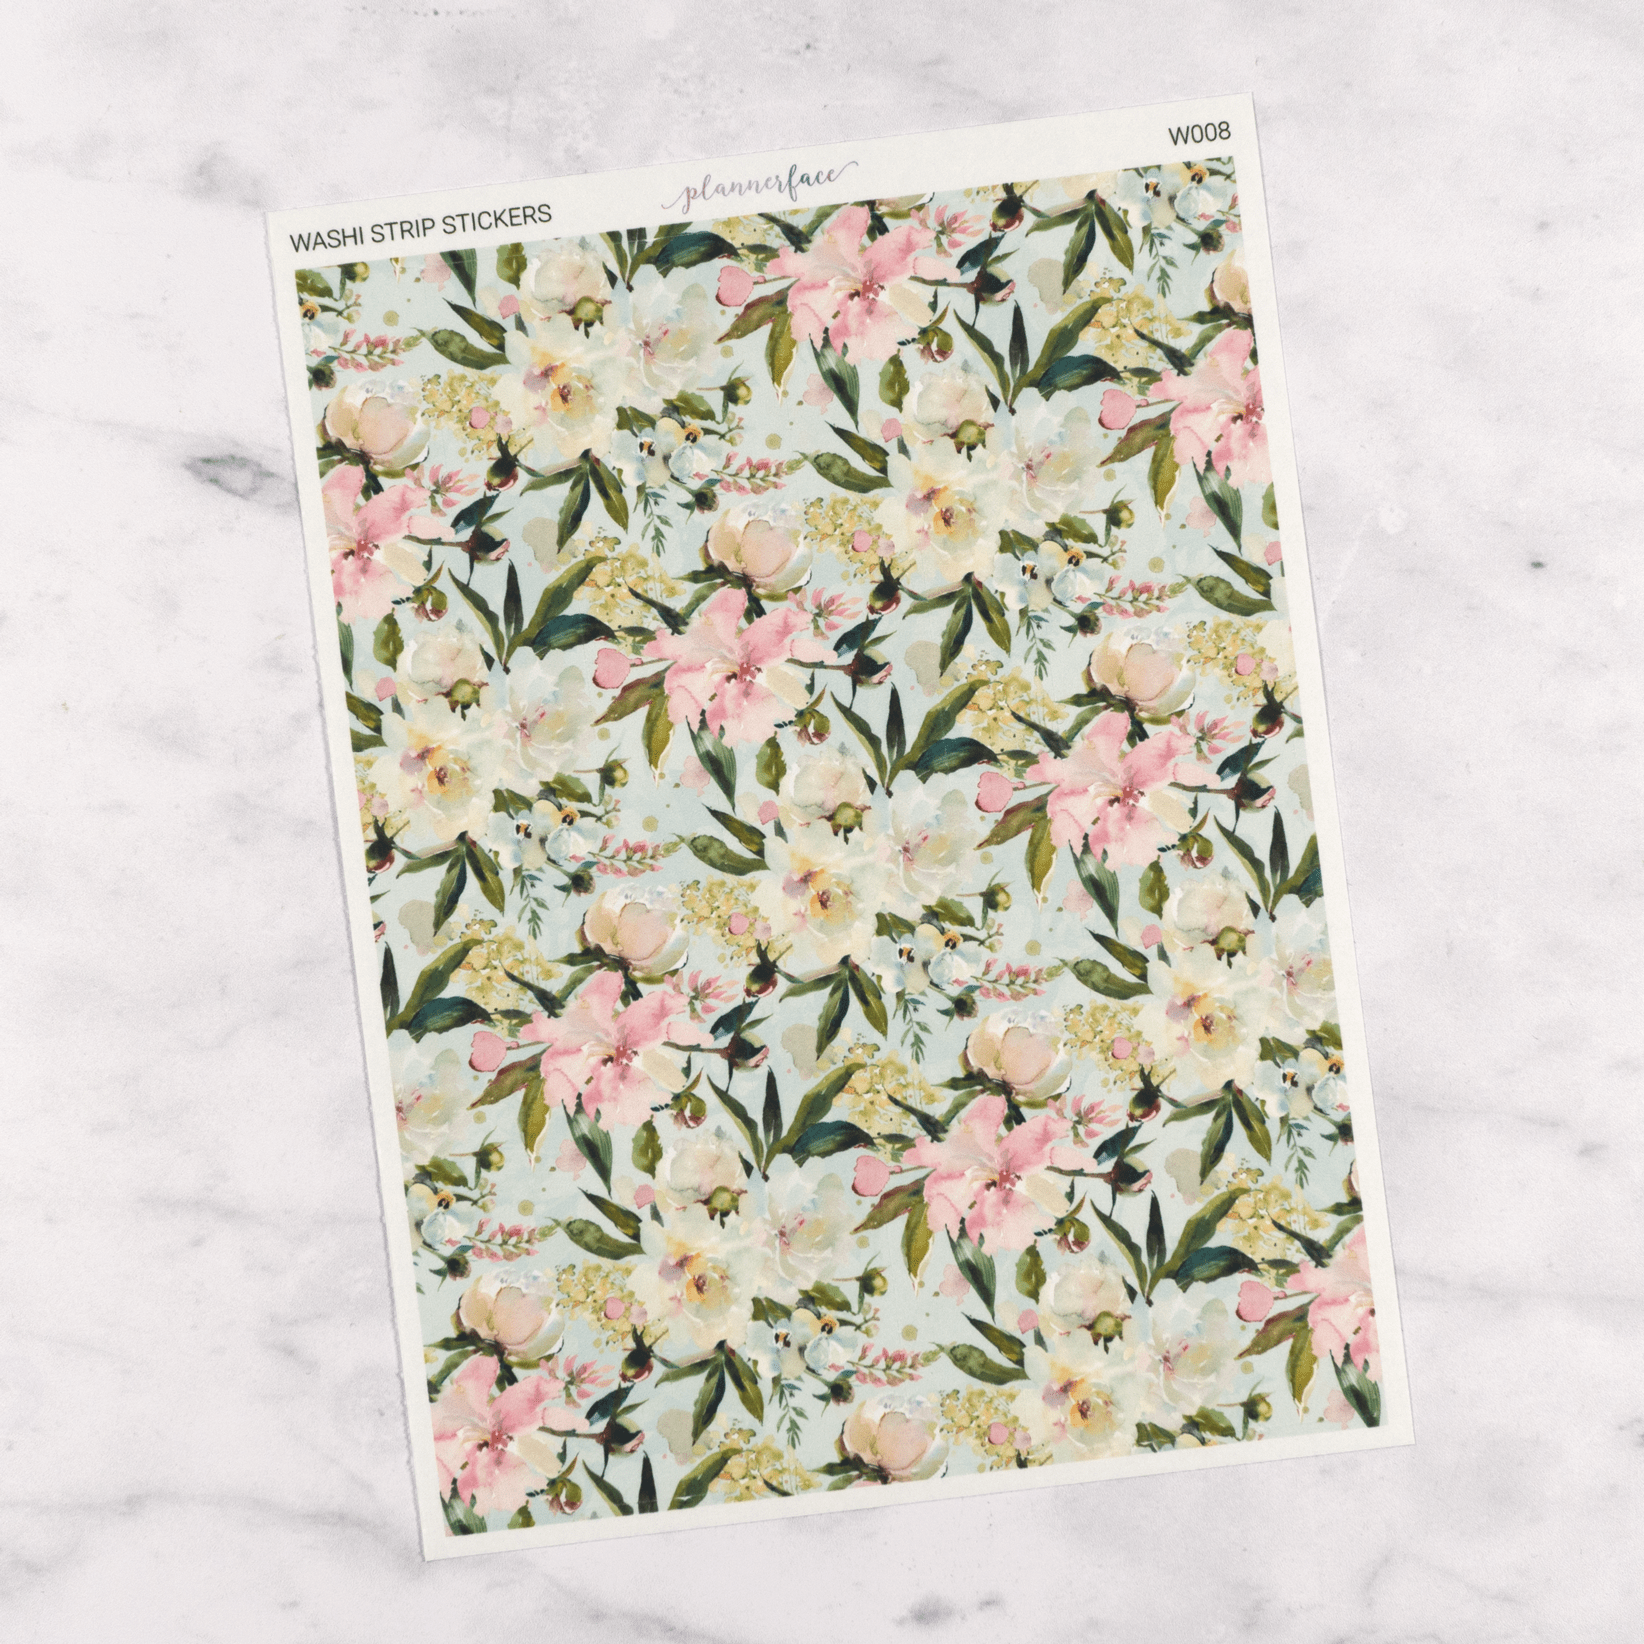 Cream & Pink Floral | Washi Tape Strips by Plannerface